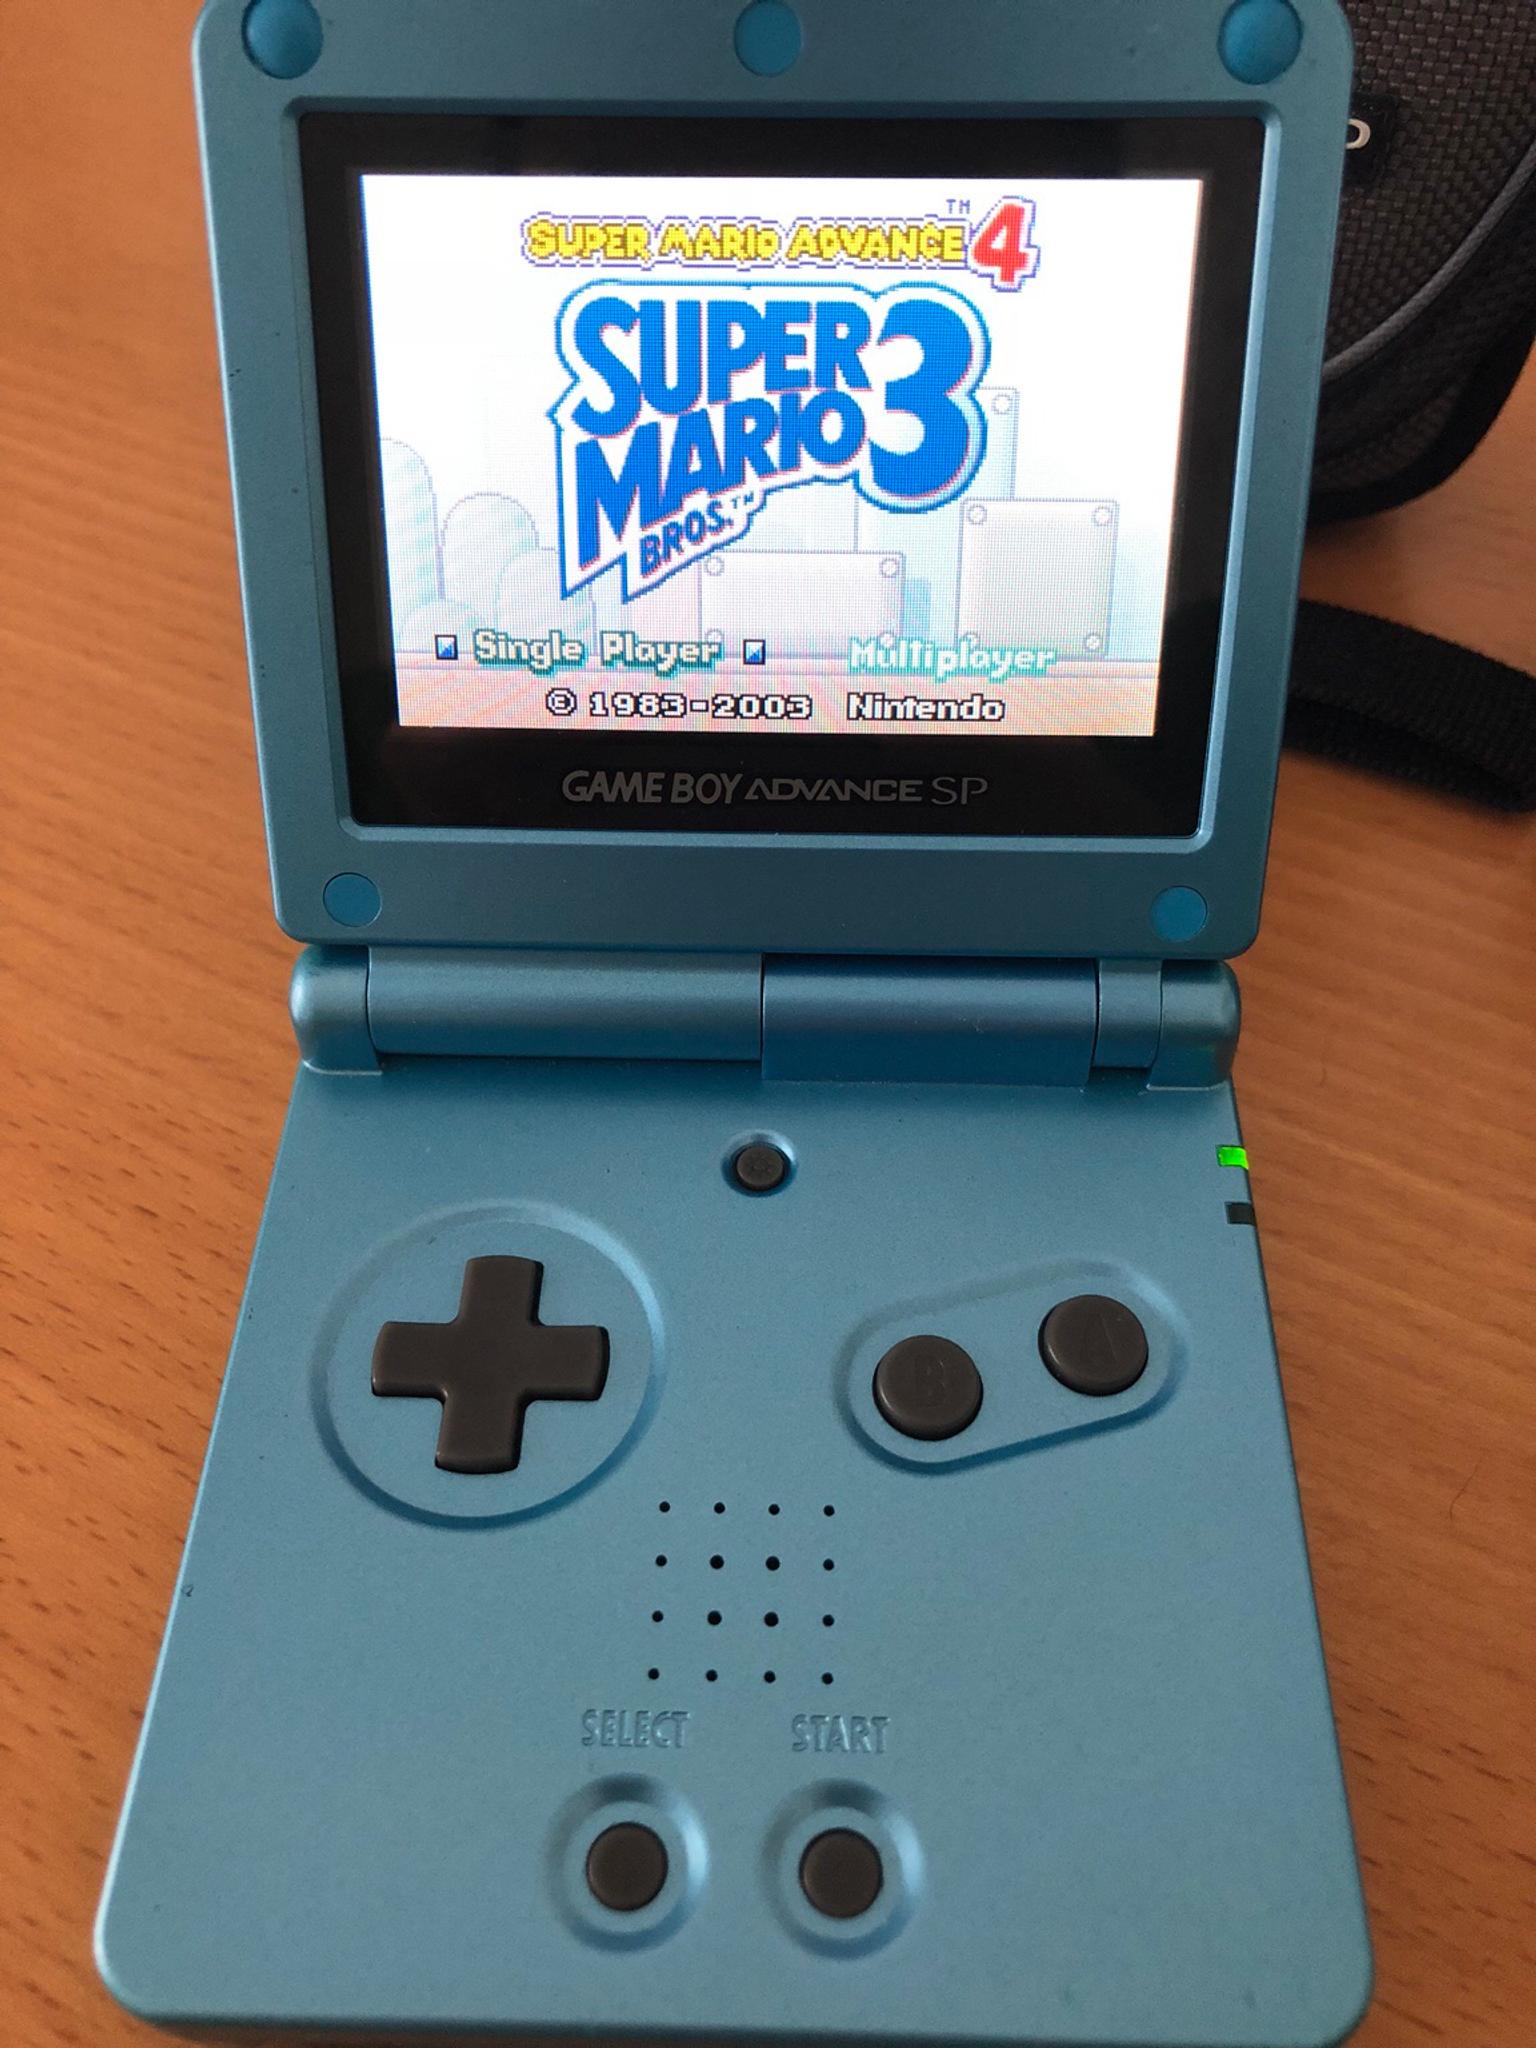 Gameboy advance sp blacklight ags 101 in 00189 Roma for €110.00 